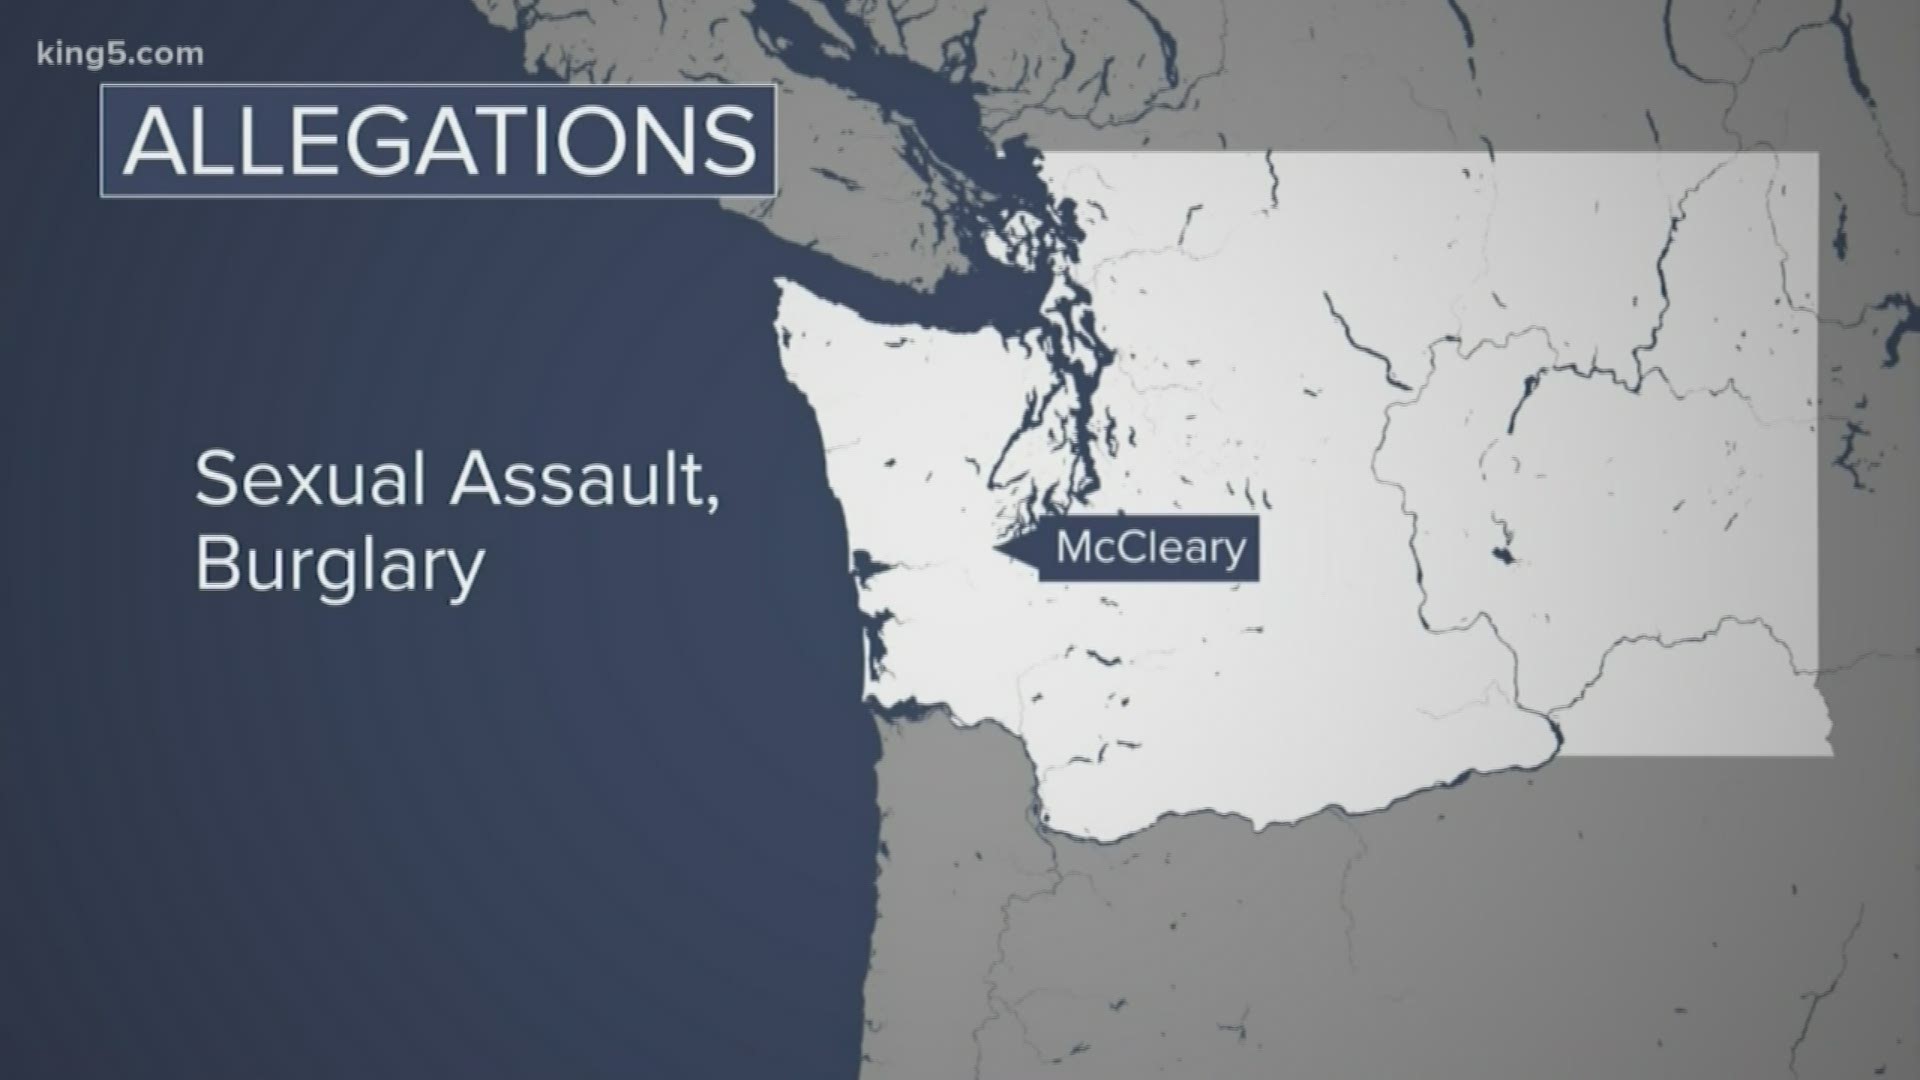 A 21-year-old is accused of kidnapping and sexually assaulting underage girls in Washington State.